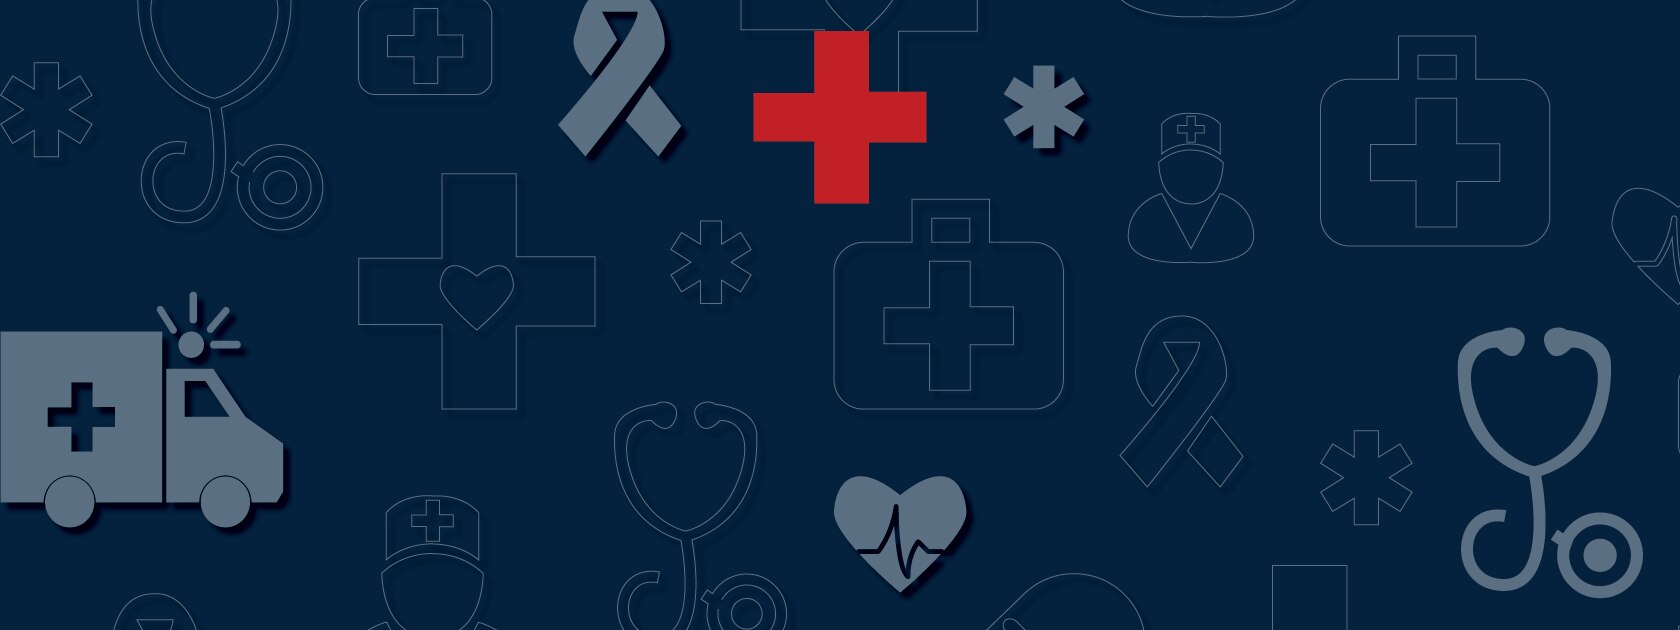 a navy blue background with light grey medical icons and a red cross